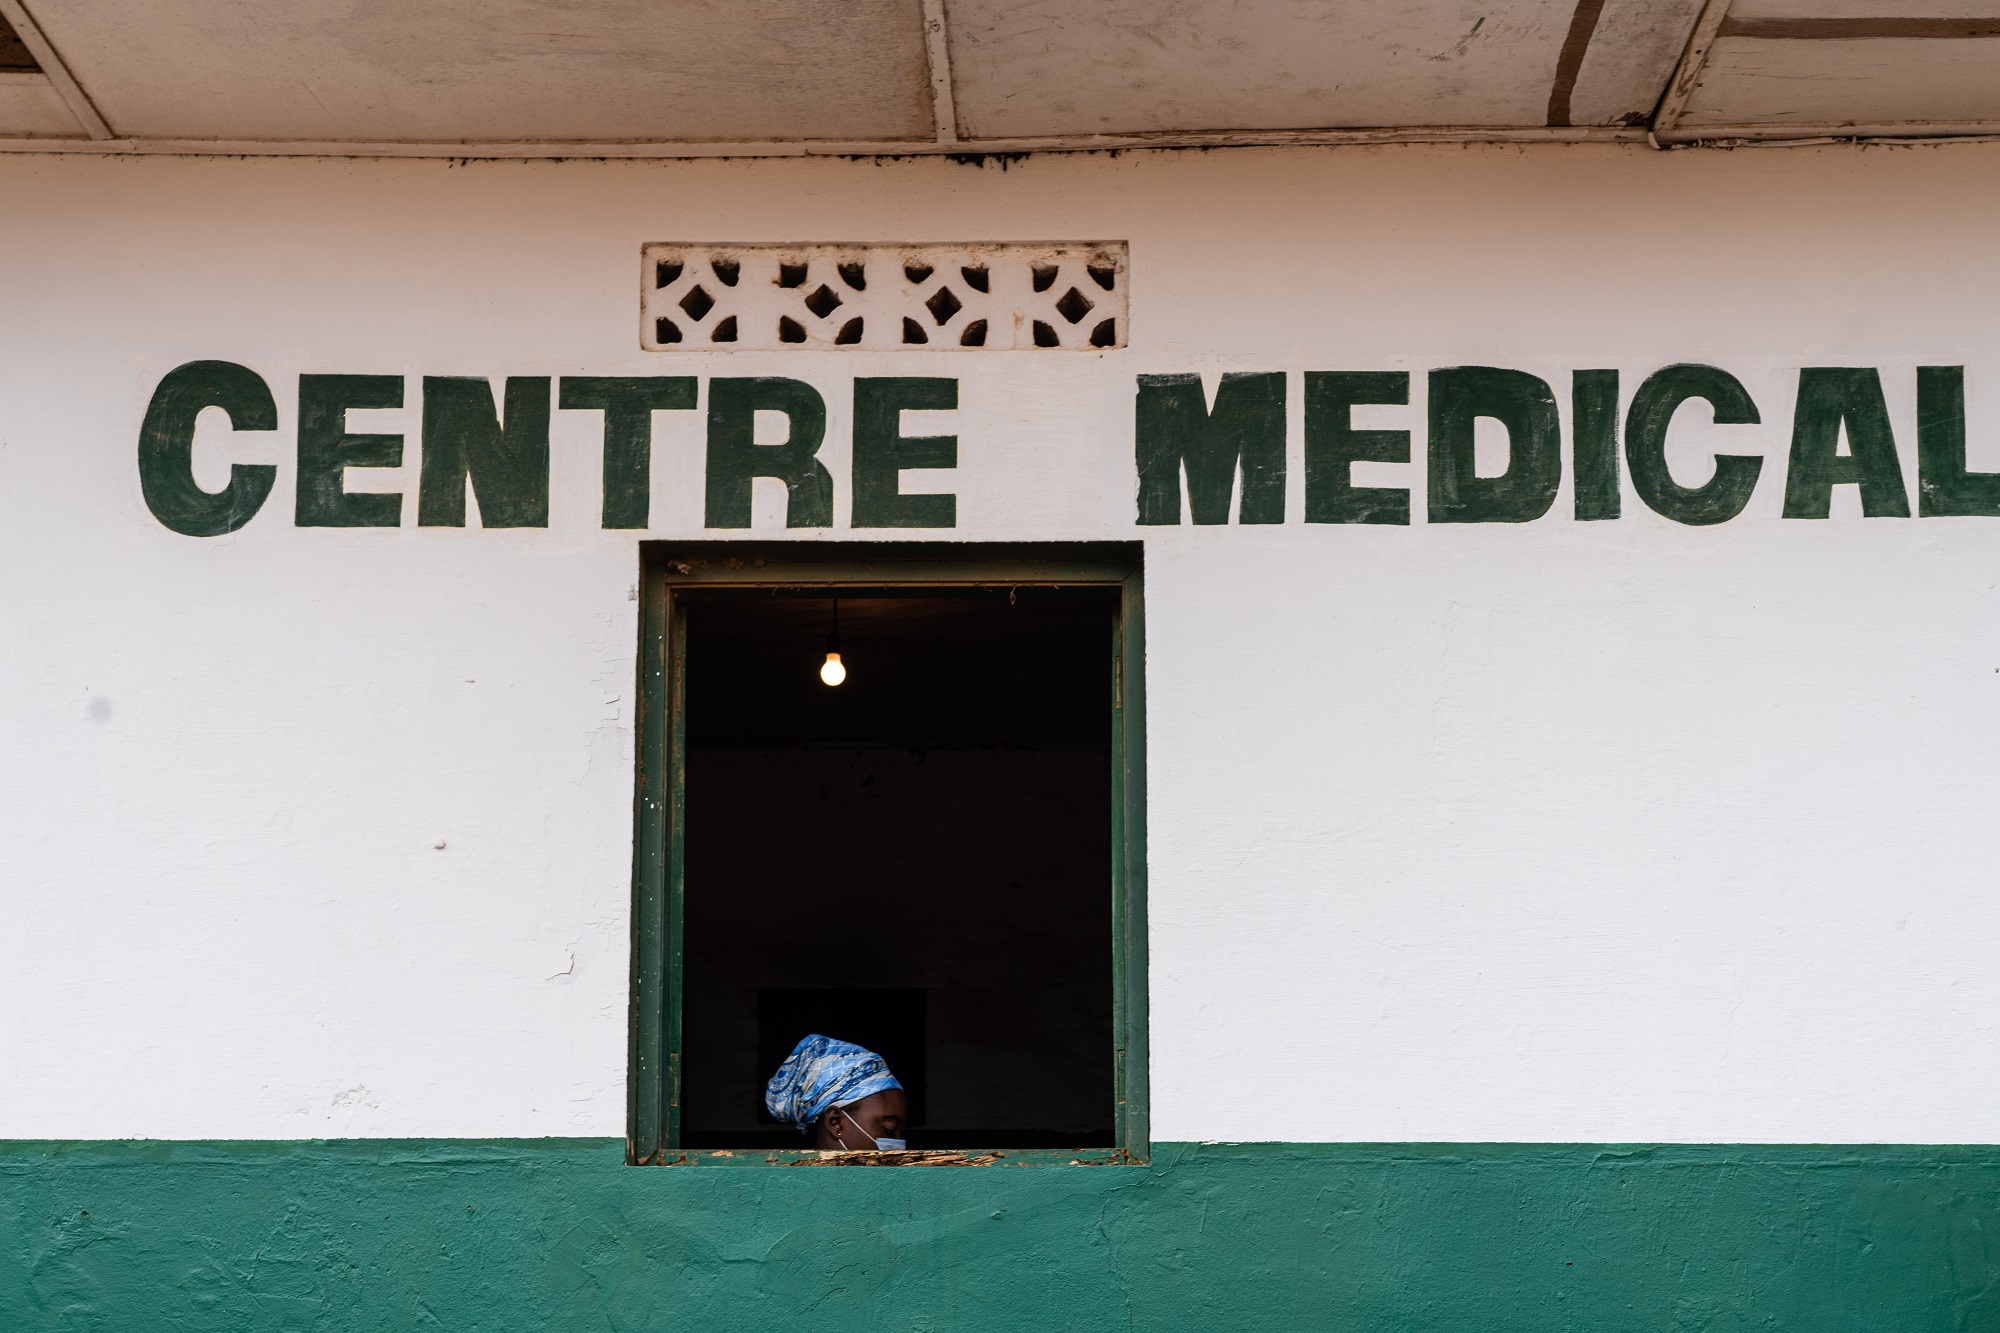 A nurse inside the Kimbanguiste Medical Center, an enrollment site for agents and health providers of the mobile money services program in Matadi, Democratic Republic of the Congo on June 4, 2021.